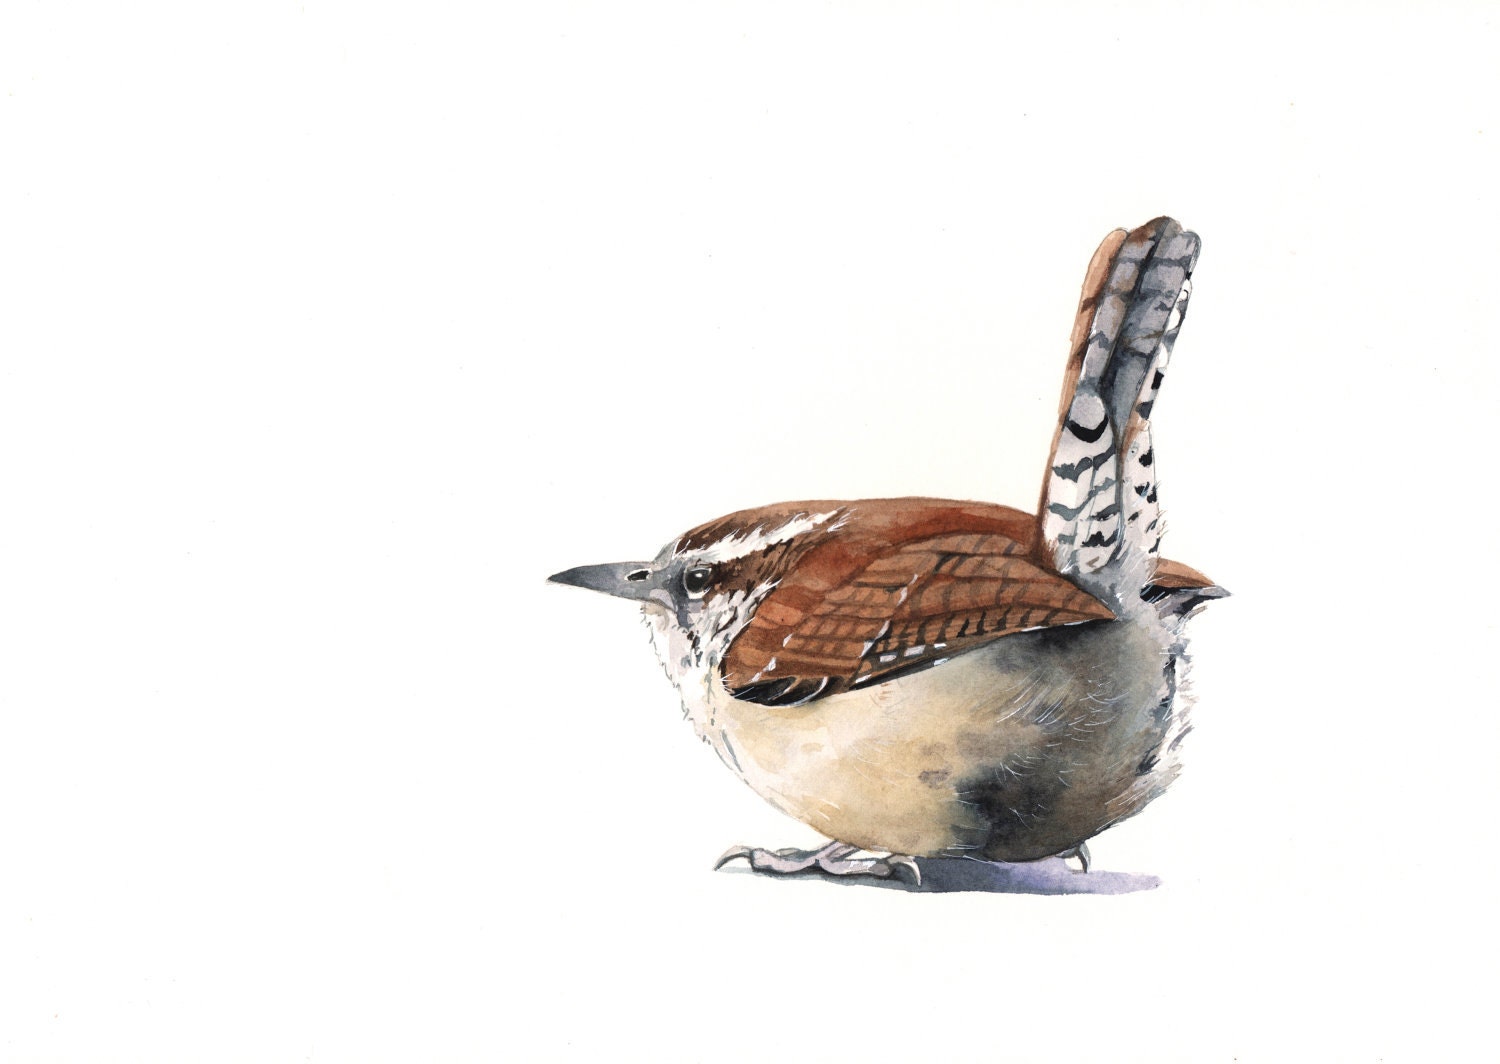 Wren Painting - W001- bird wildlife art nature brown-  print of watercolor painting -5 by 7 print - Splodgepodge